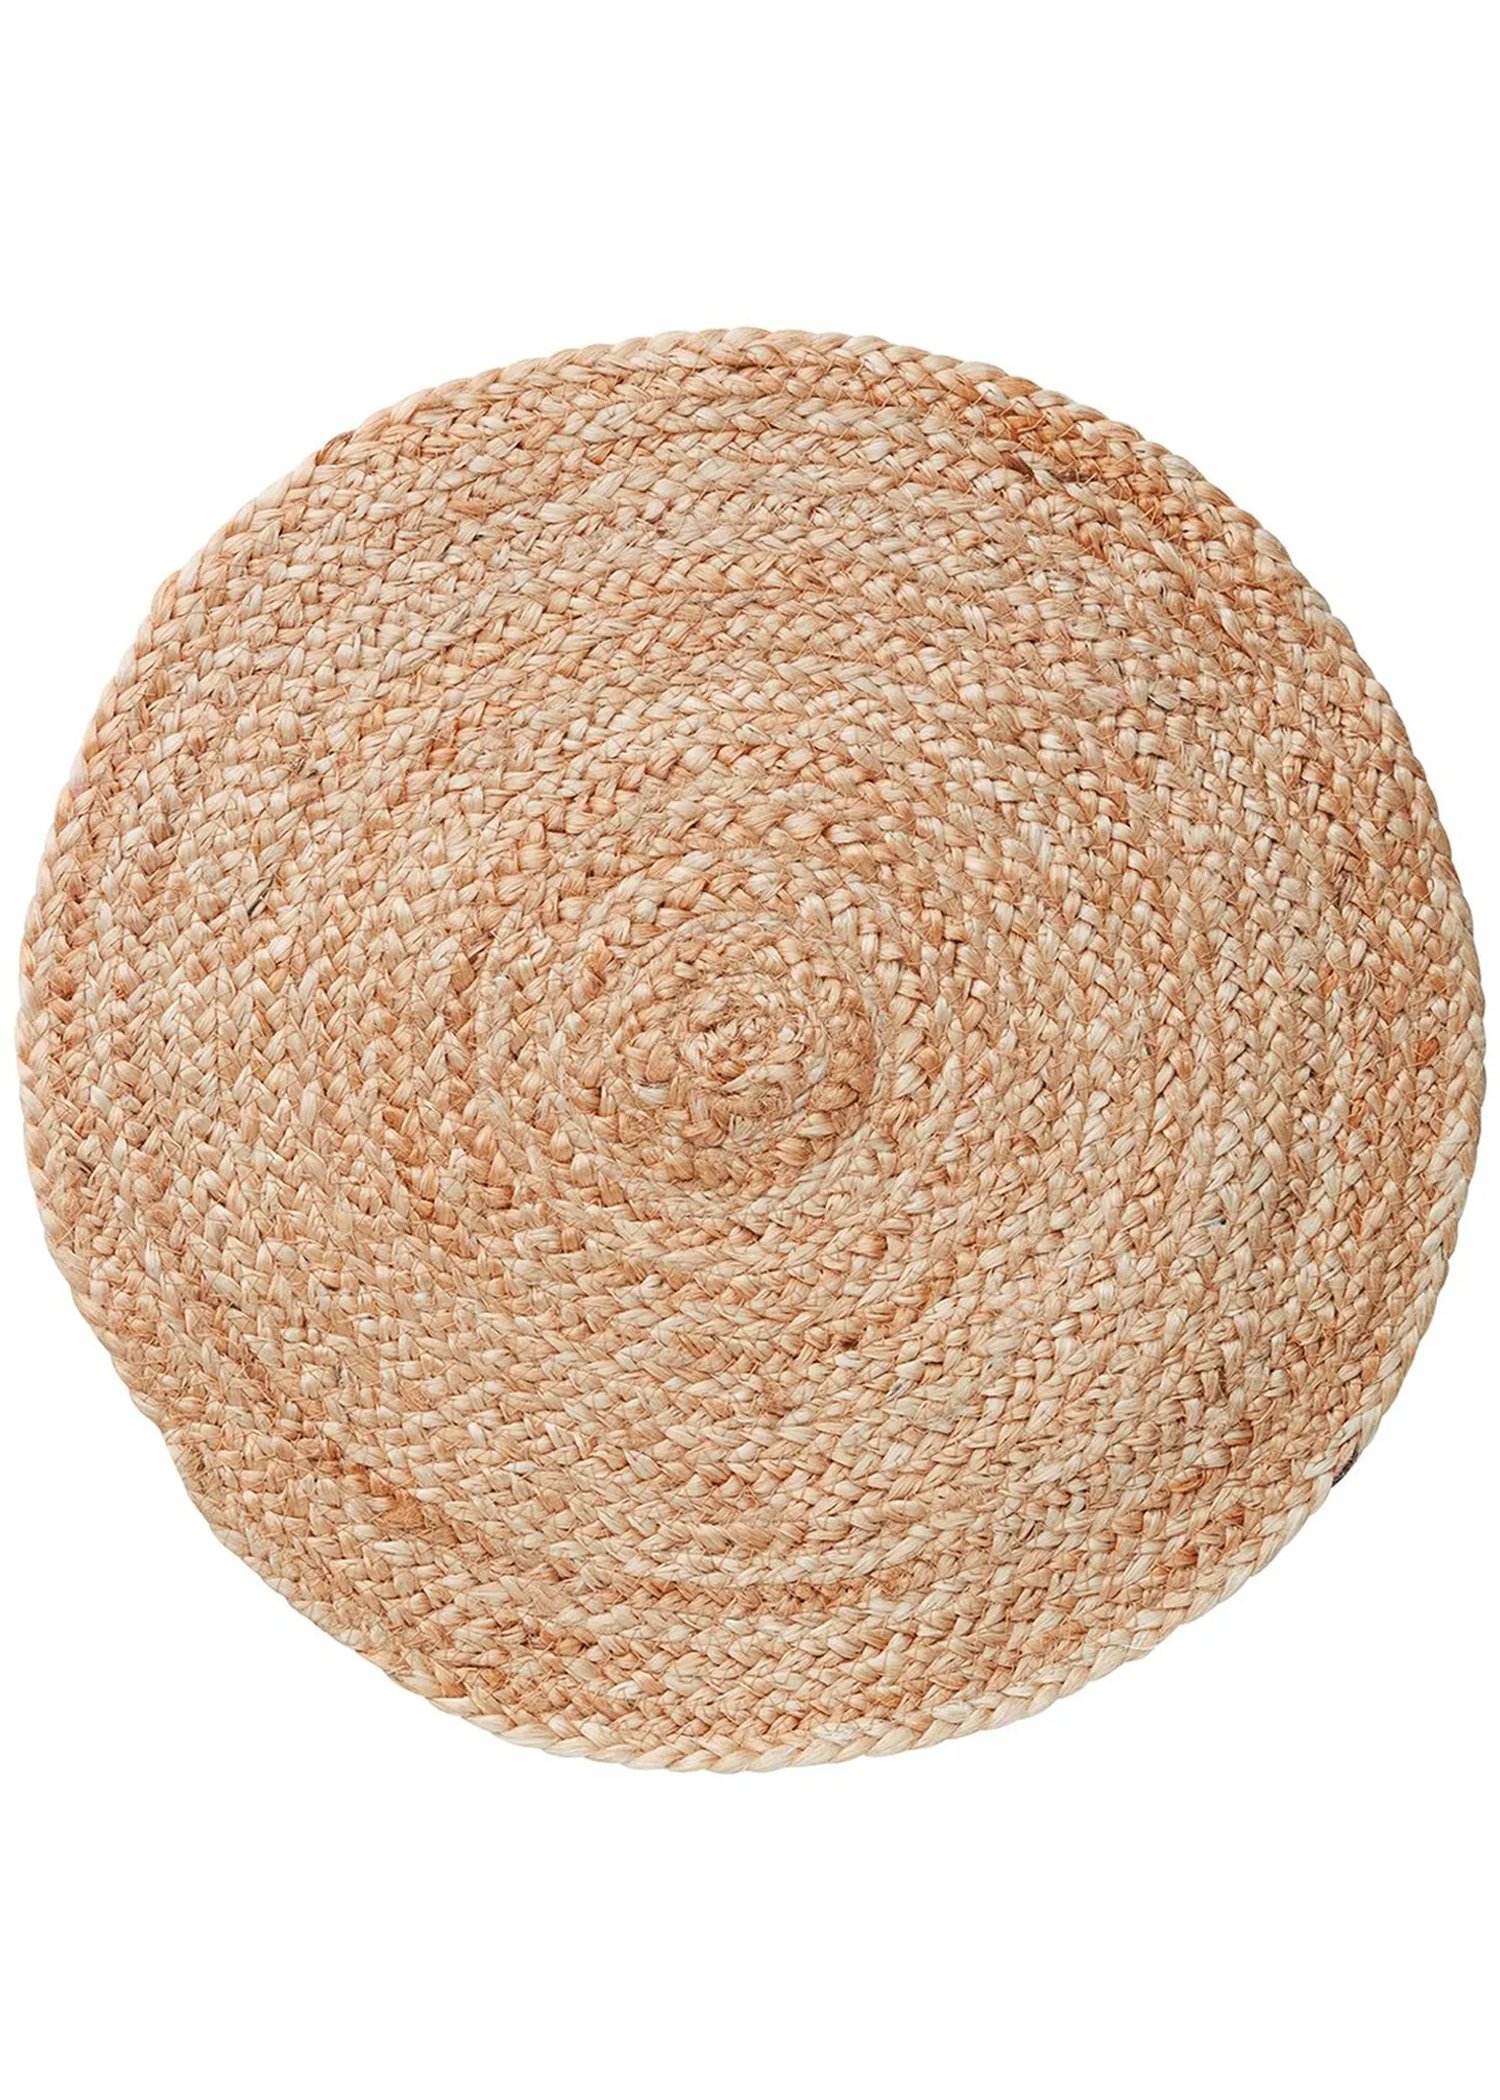 Round jute placemat